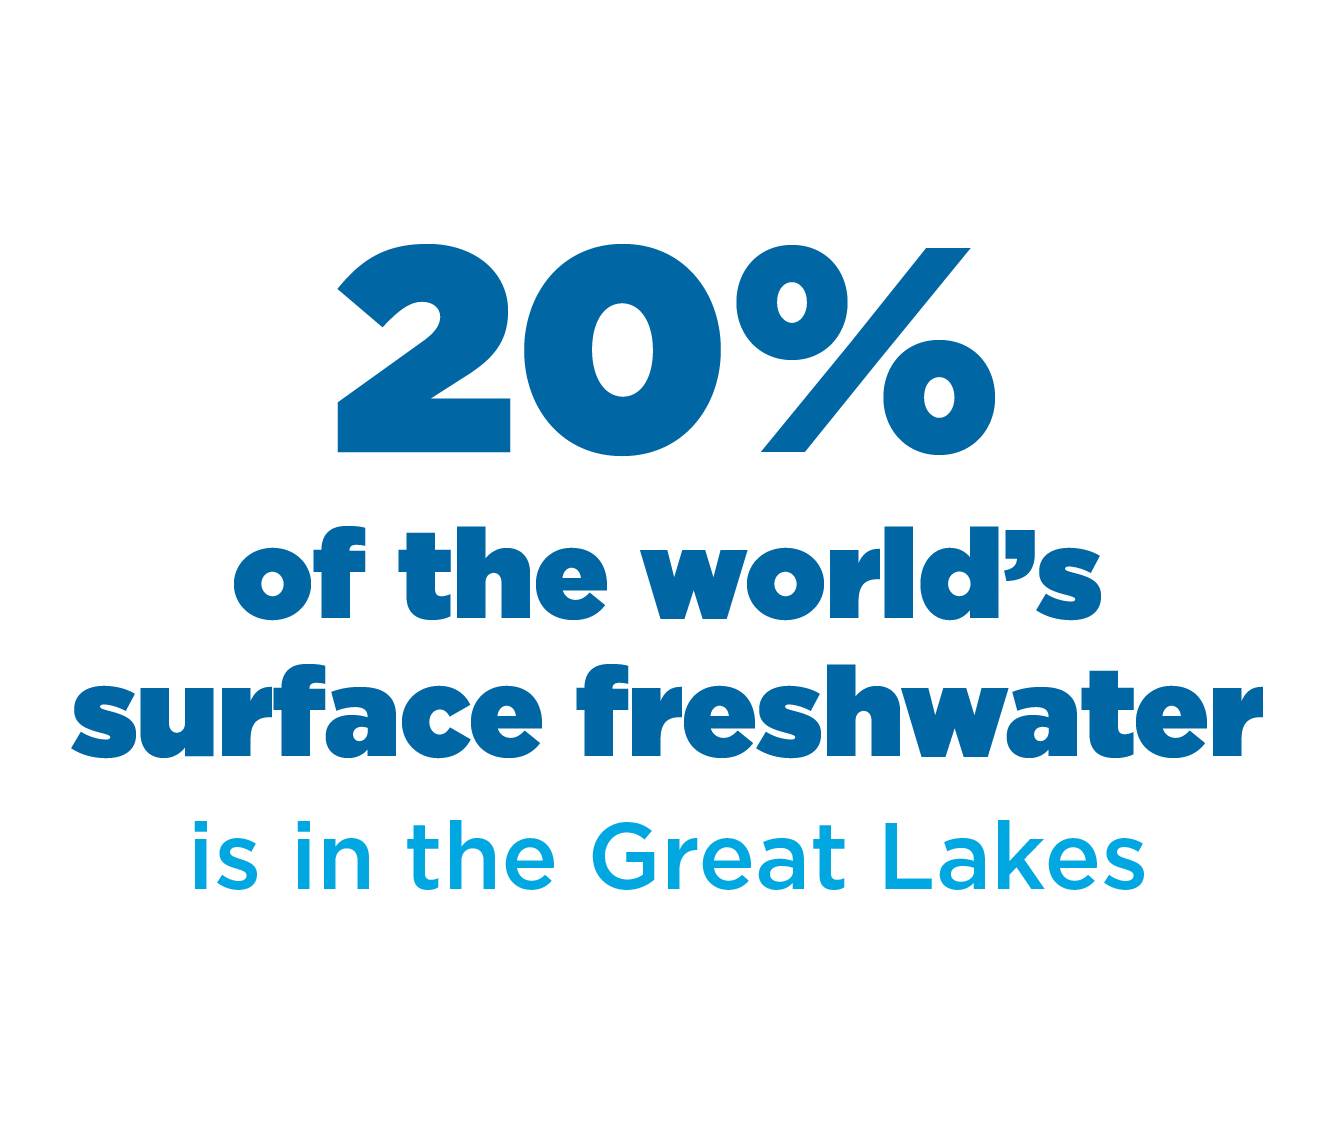 20% of the world's surface freshwater is in the Great Lakes